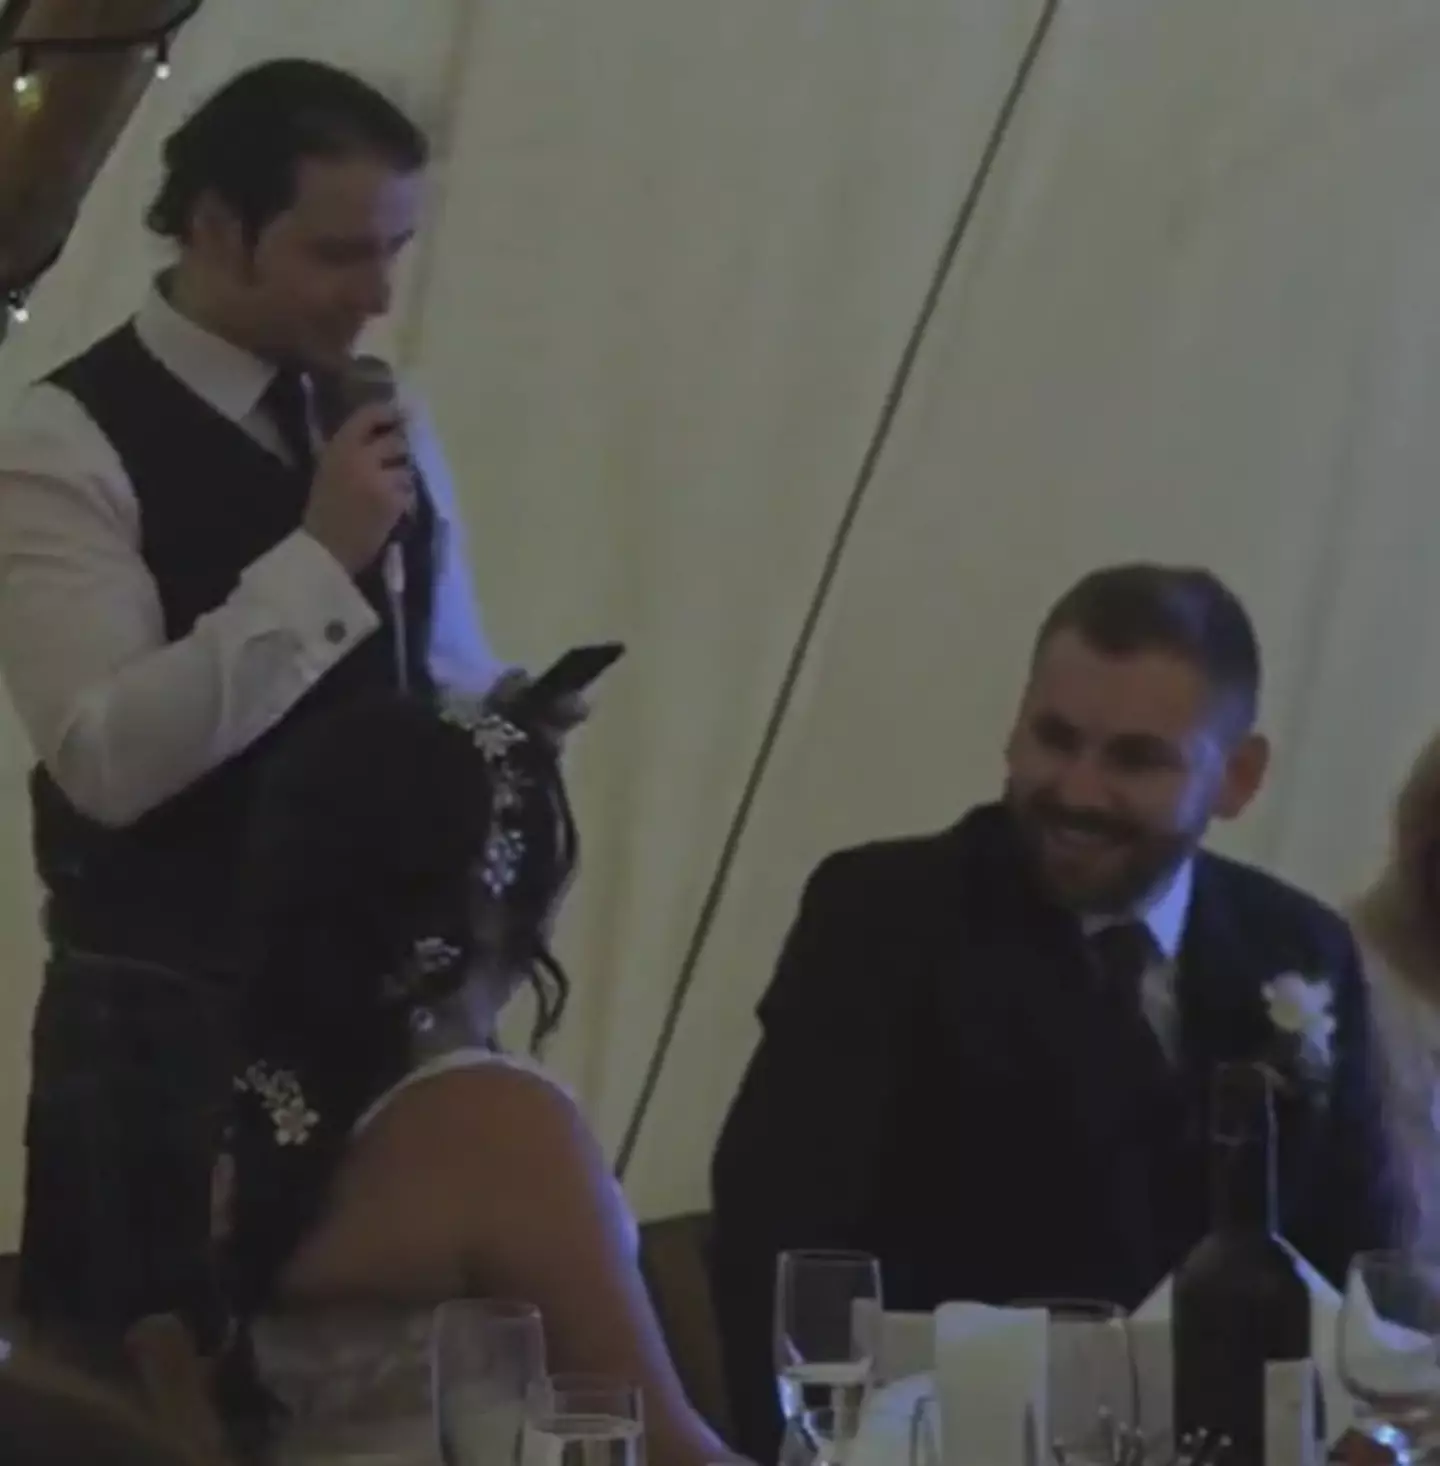 Luckily the bride and groom looked like they enjoyed the punchline.